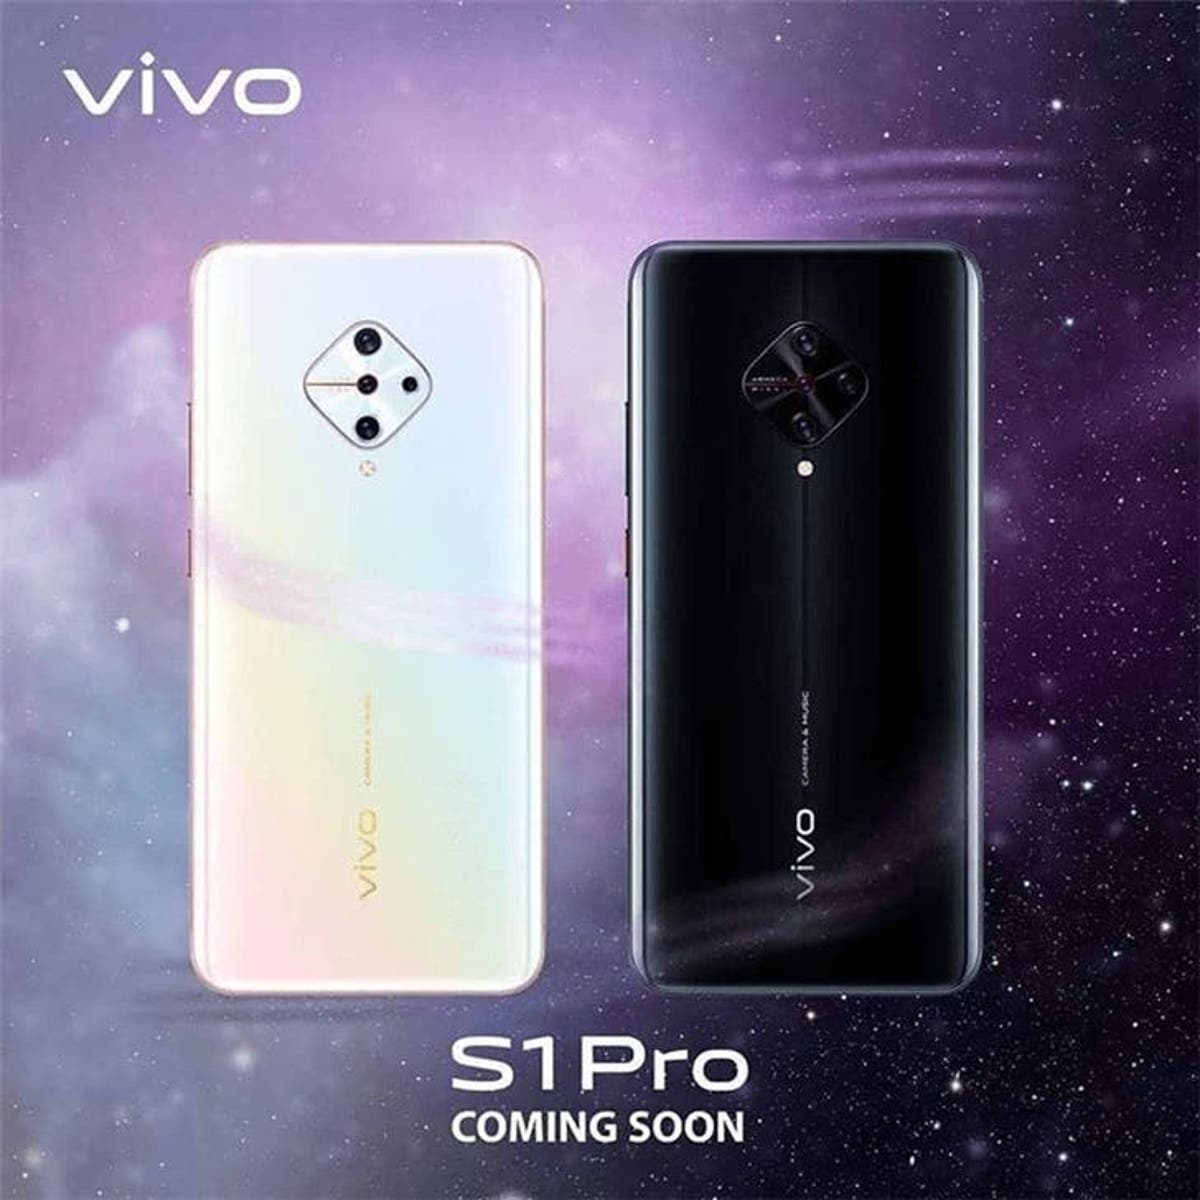 Vivo S1 Pro To Launch In India With Sd 665 Soc And Under 280